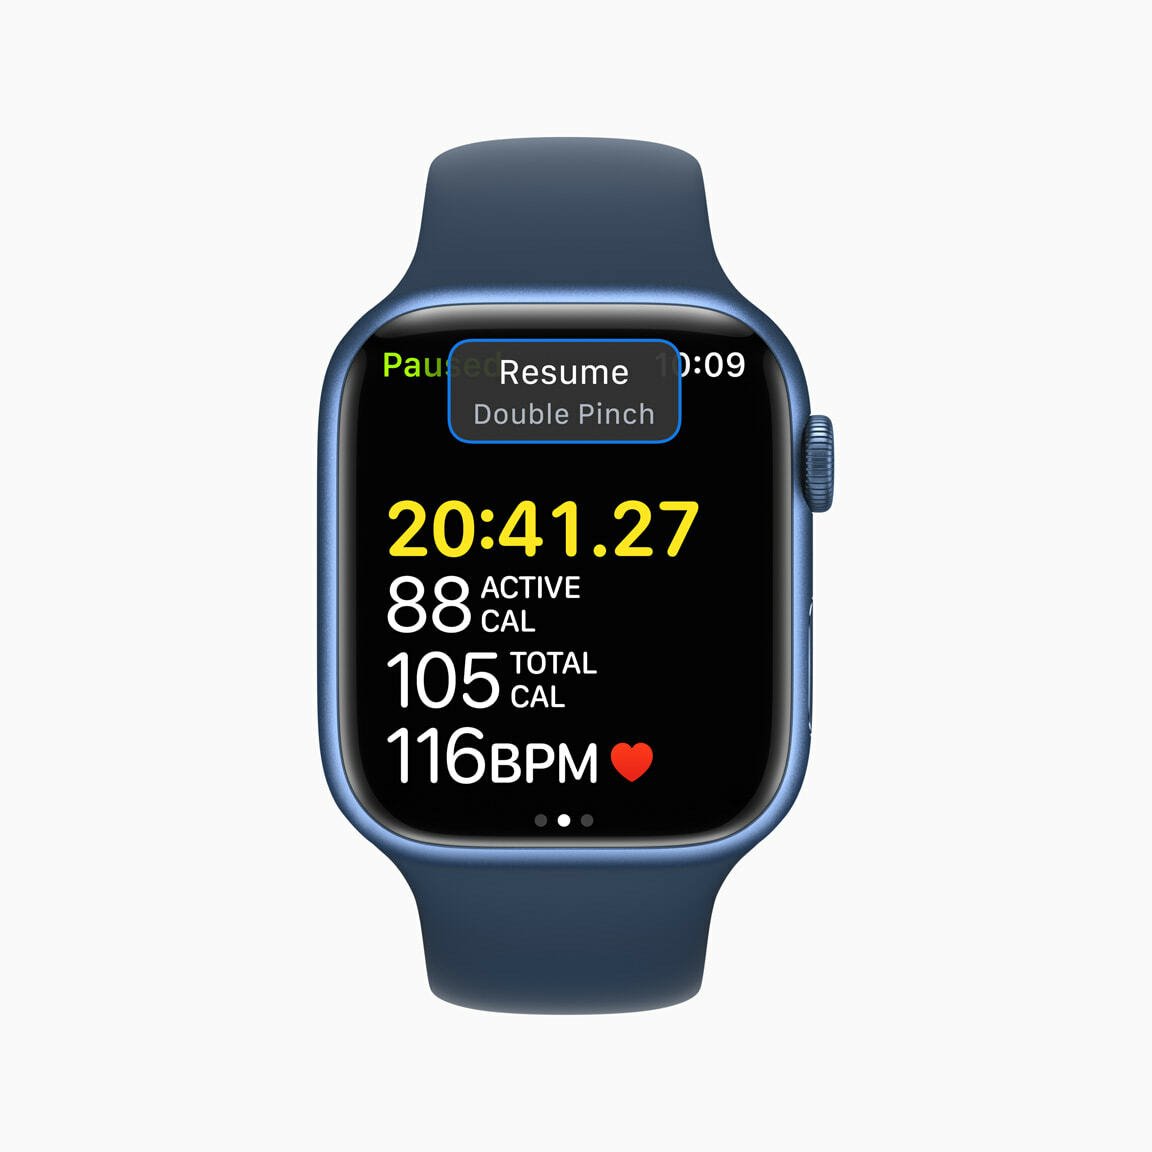 Quick Actions on Apple Watch